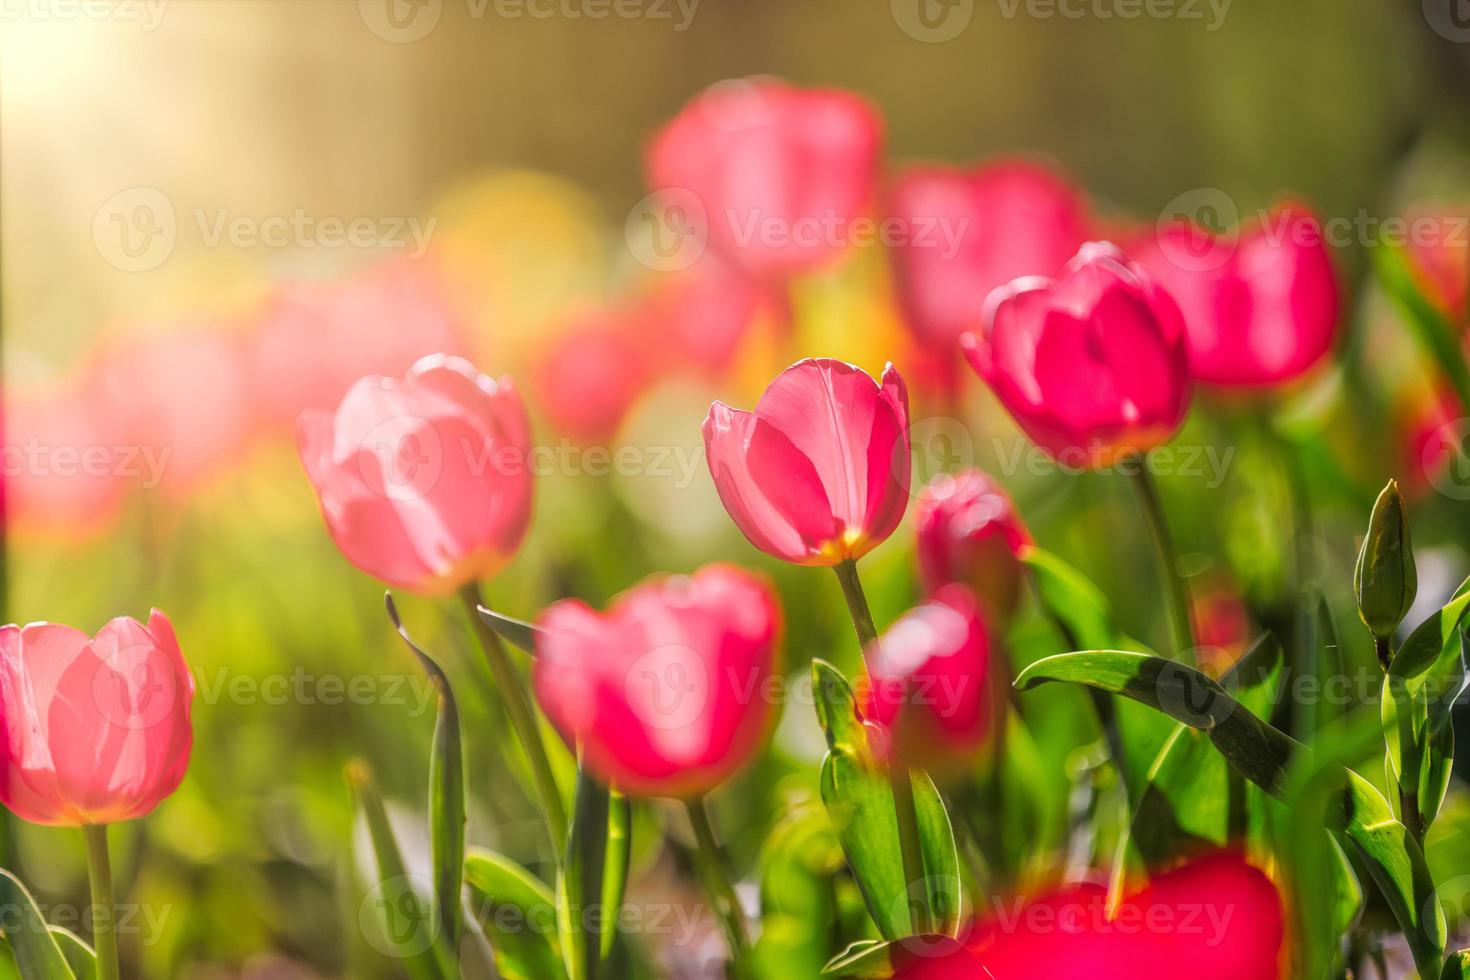 Beautiful bouquet of red tulips in spring nature closeup for card design and web template. Tranquil city park, garden with blooming romantic flowers. Summer floral landscape, sunny petals, rays, beams photo